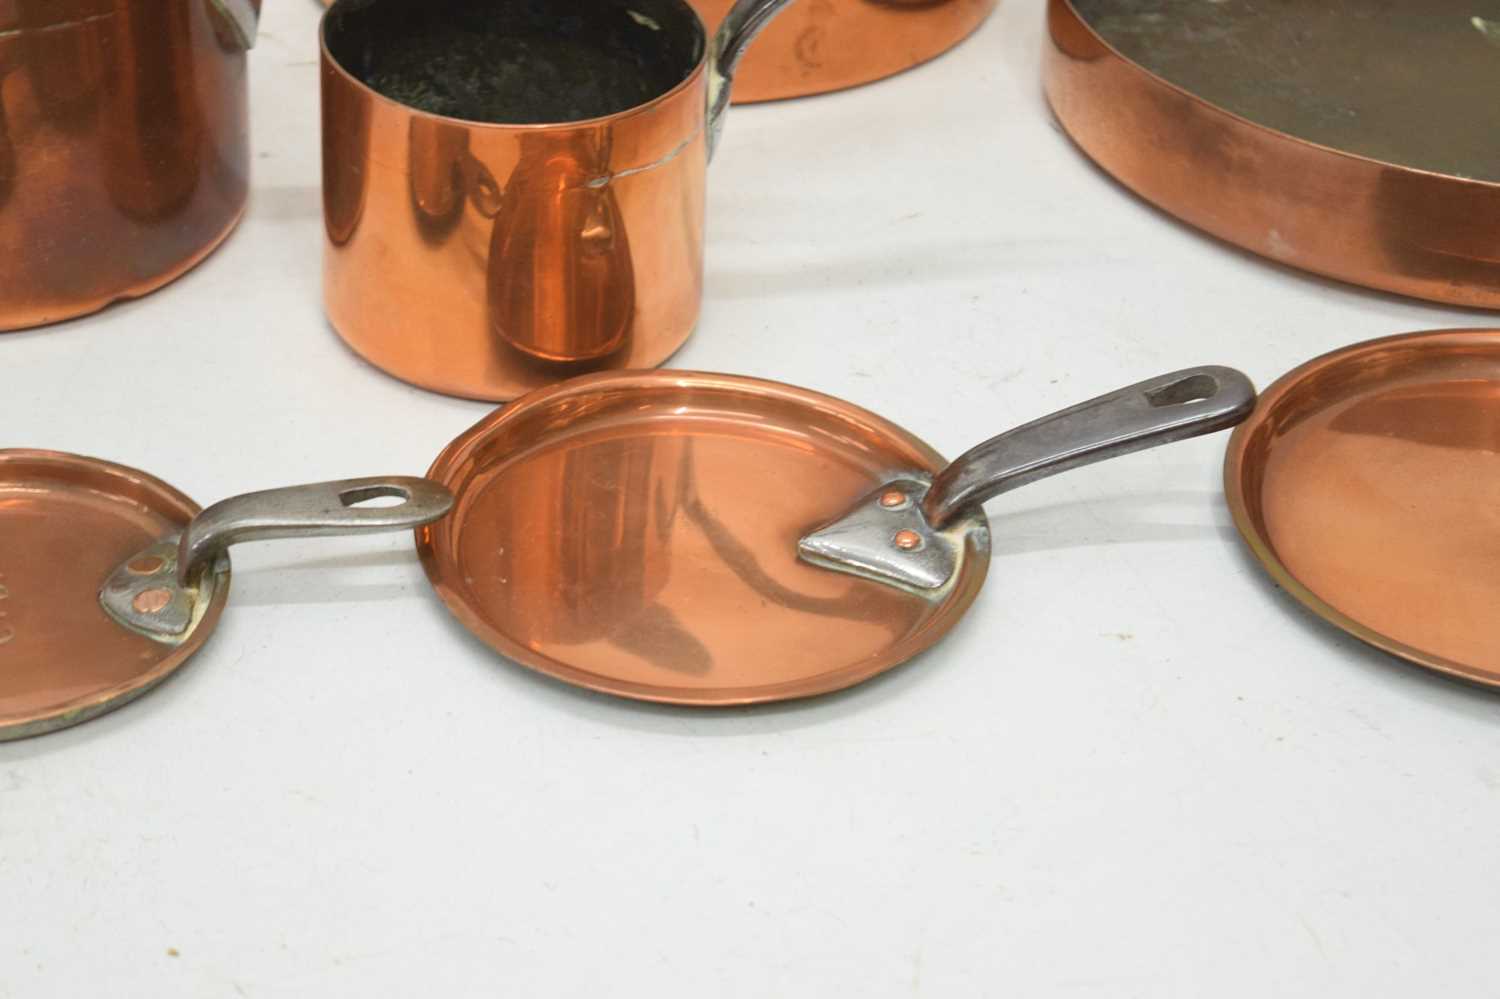 Graduated set of four copper saucepans with iron handles - Image 5 of 9